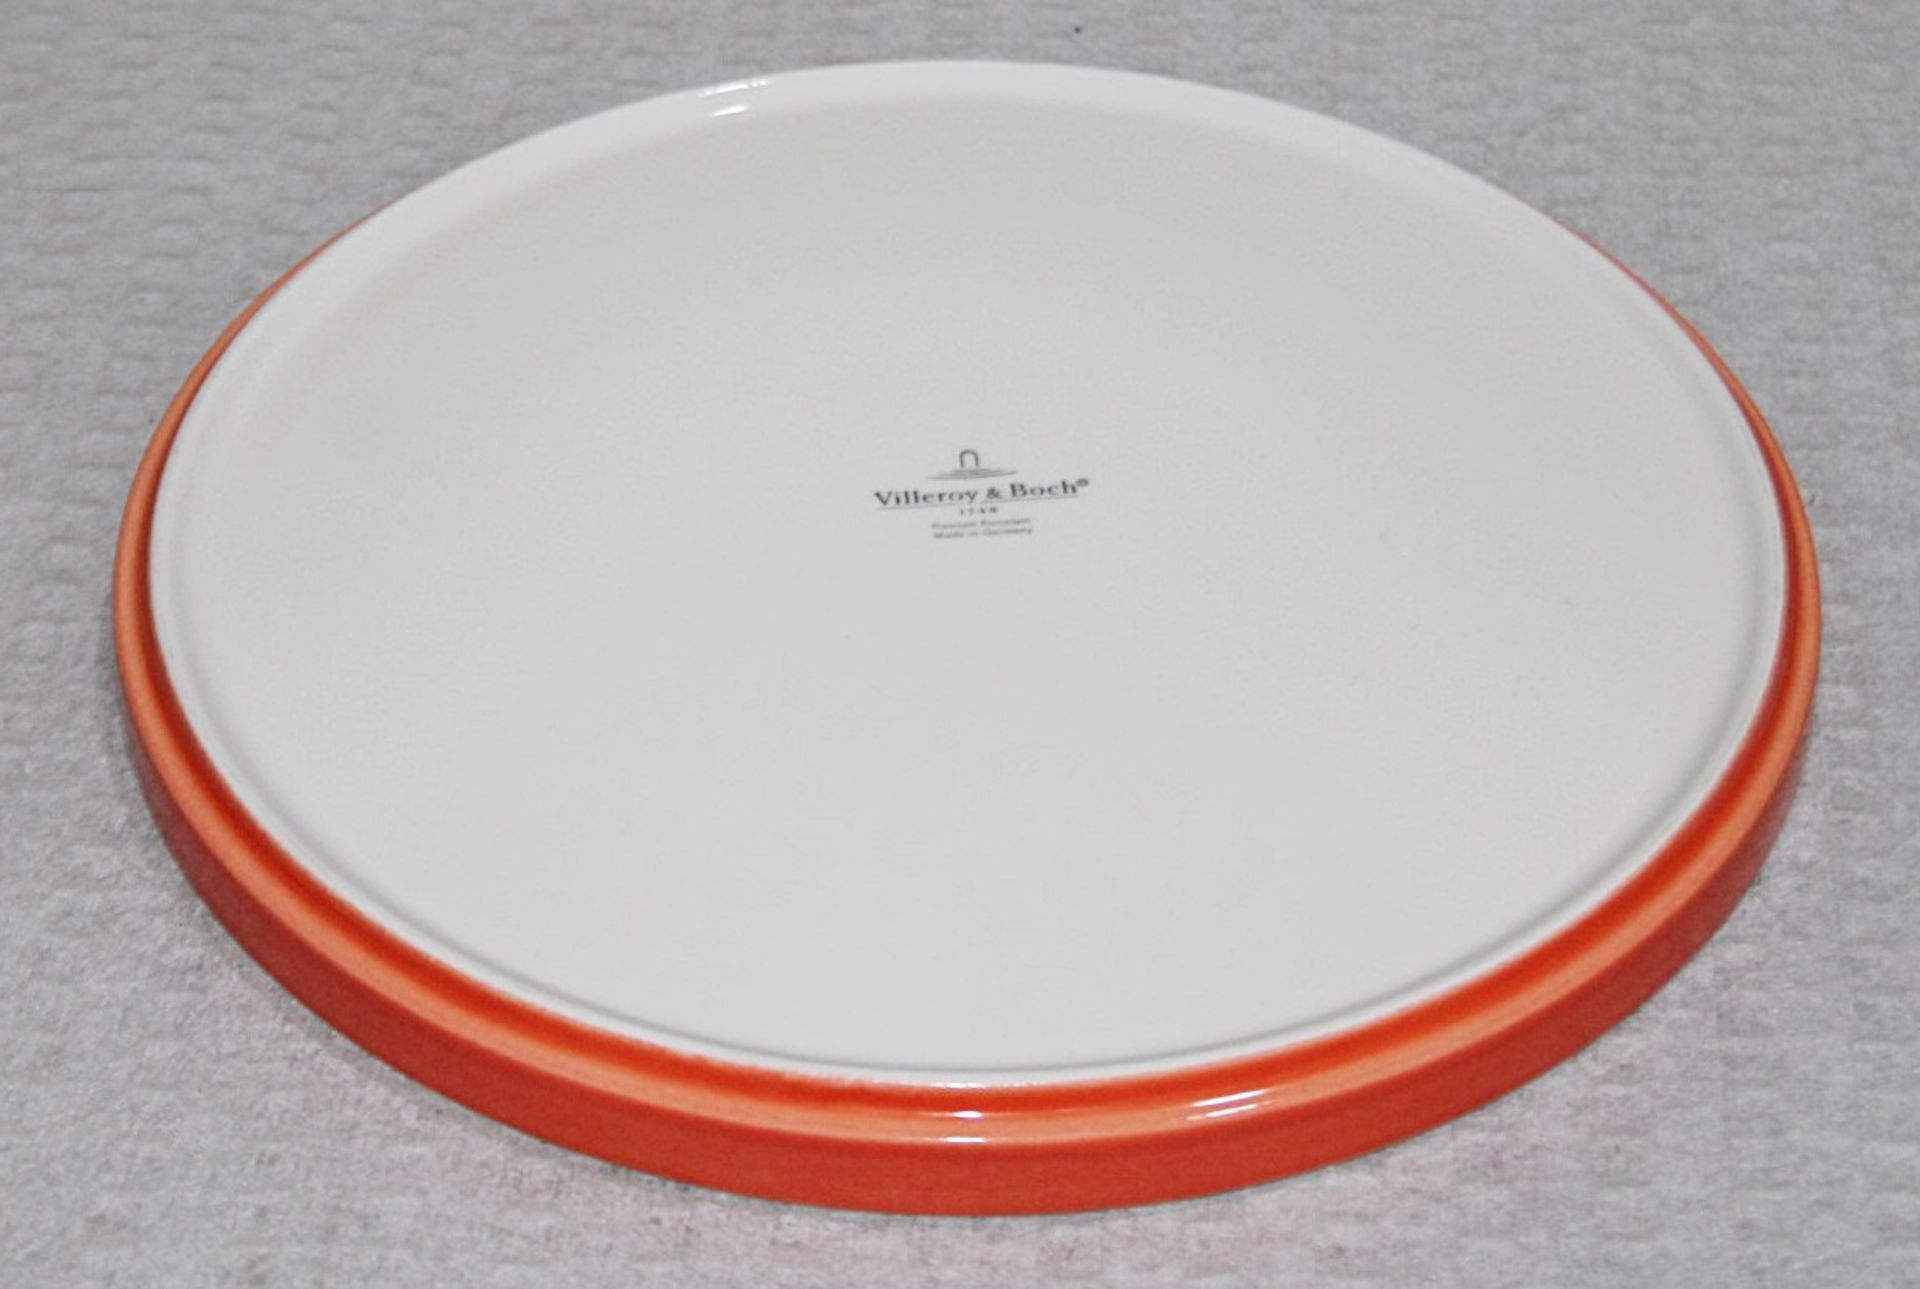 1 x VILLEROY & BOCH Porcelain ø24cm Universial Plate With An Orange Band - Unboxed Stock - Ref: - Image 3 of 5